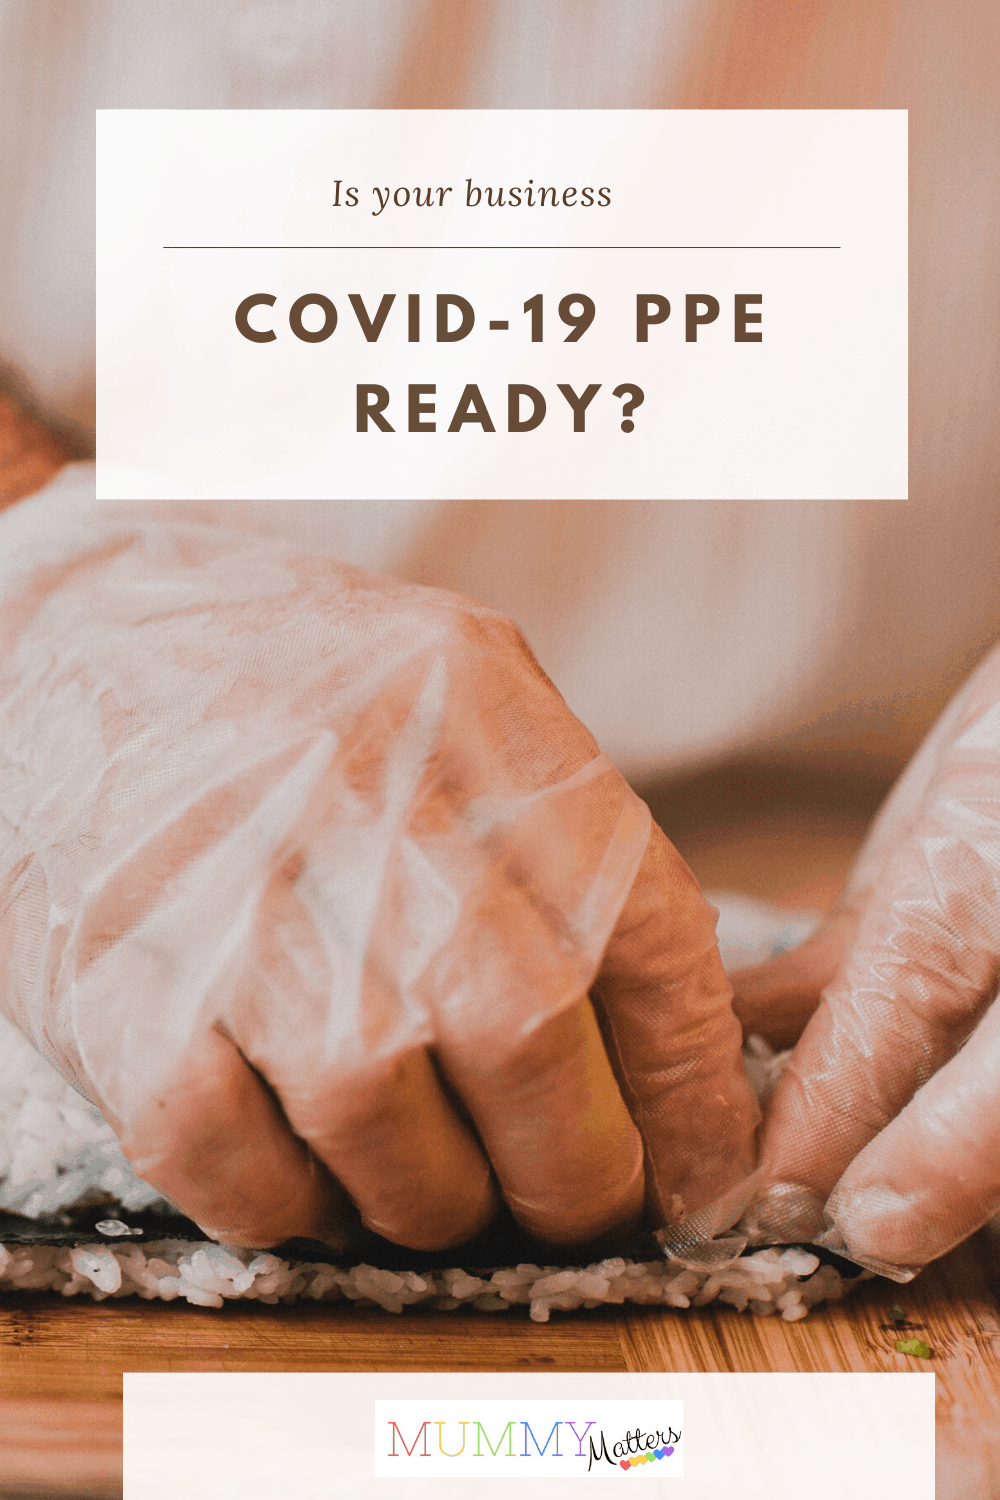 Whatever your business, if you are looking to open again soon you'll need to ensure you are Covid-19 PPE ready to keep you, your staff and customers safe.